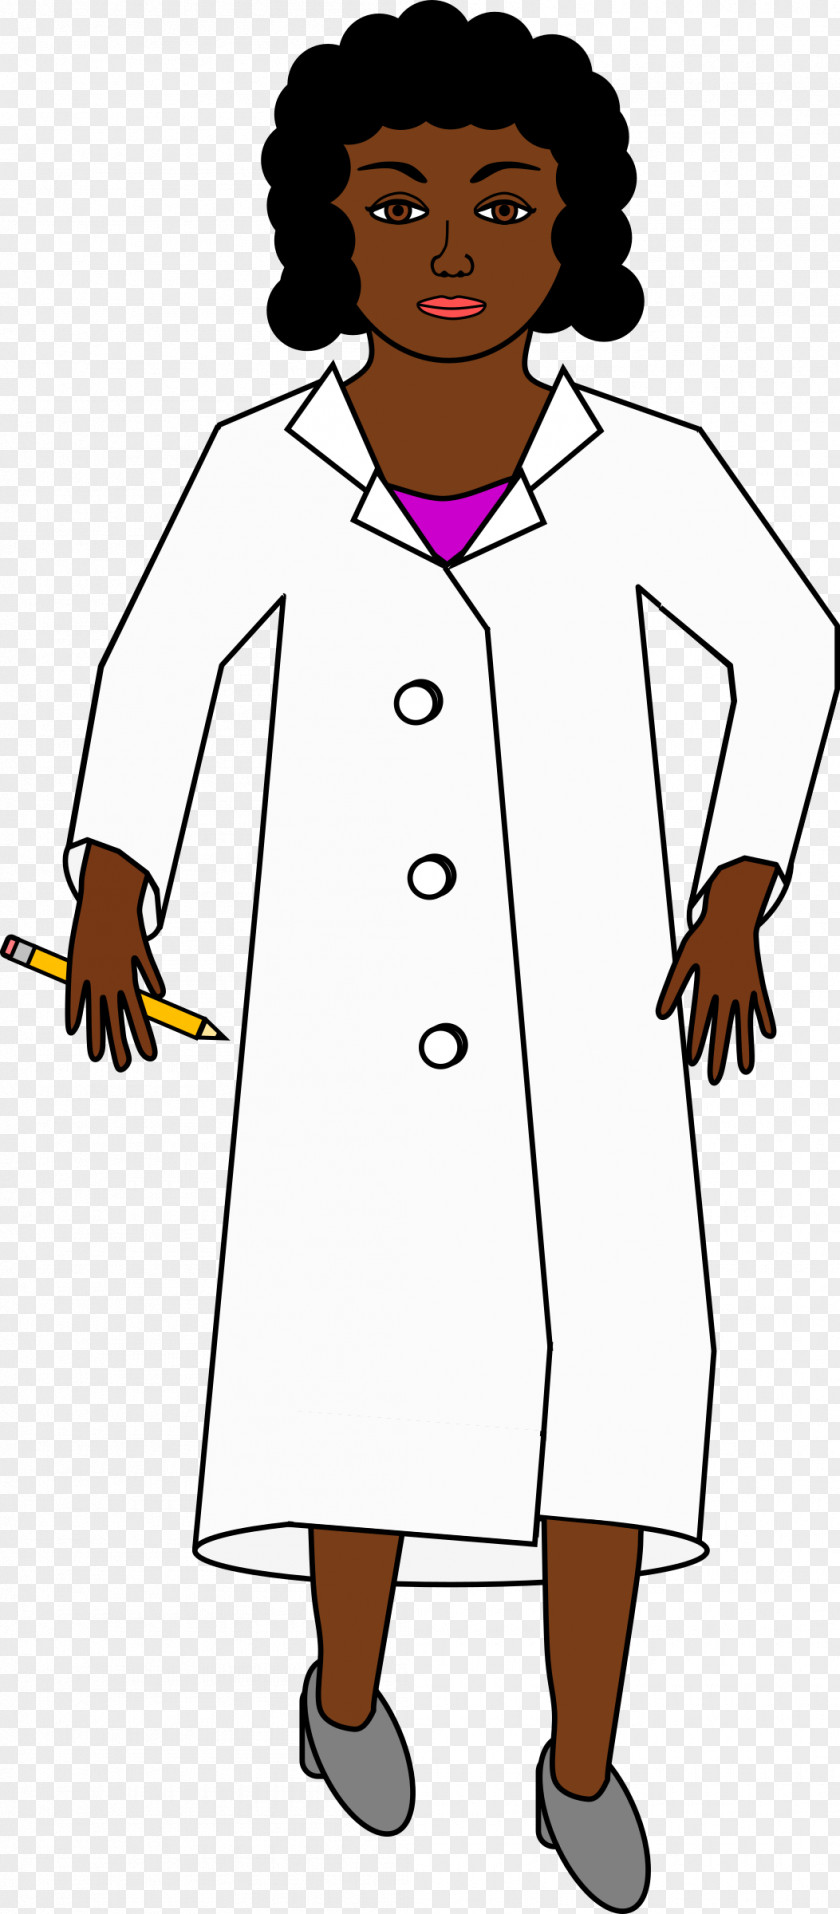 Scientists Physician Clip Art PNG